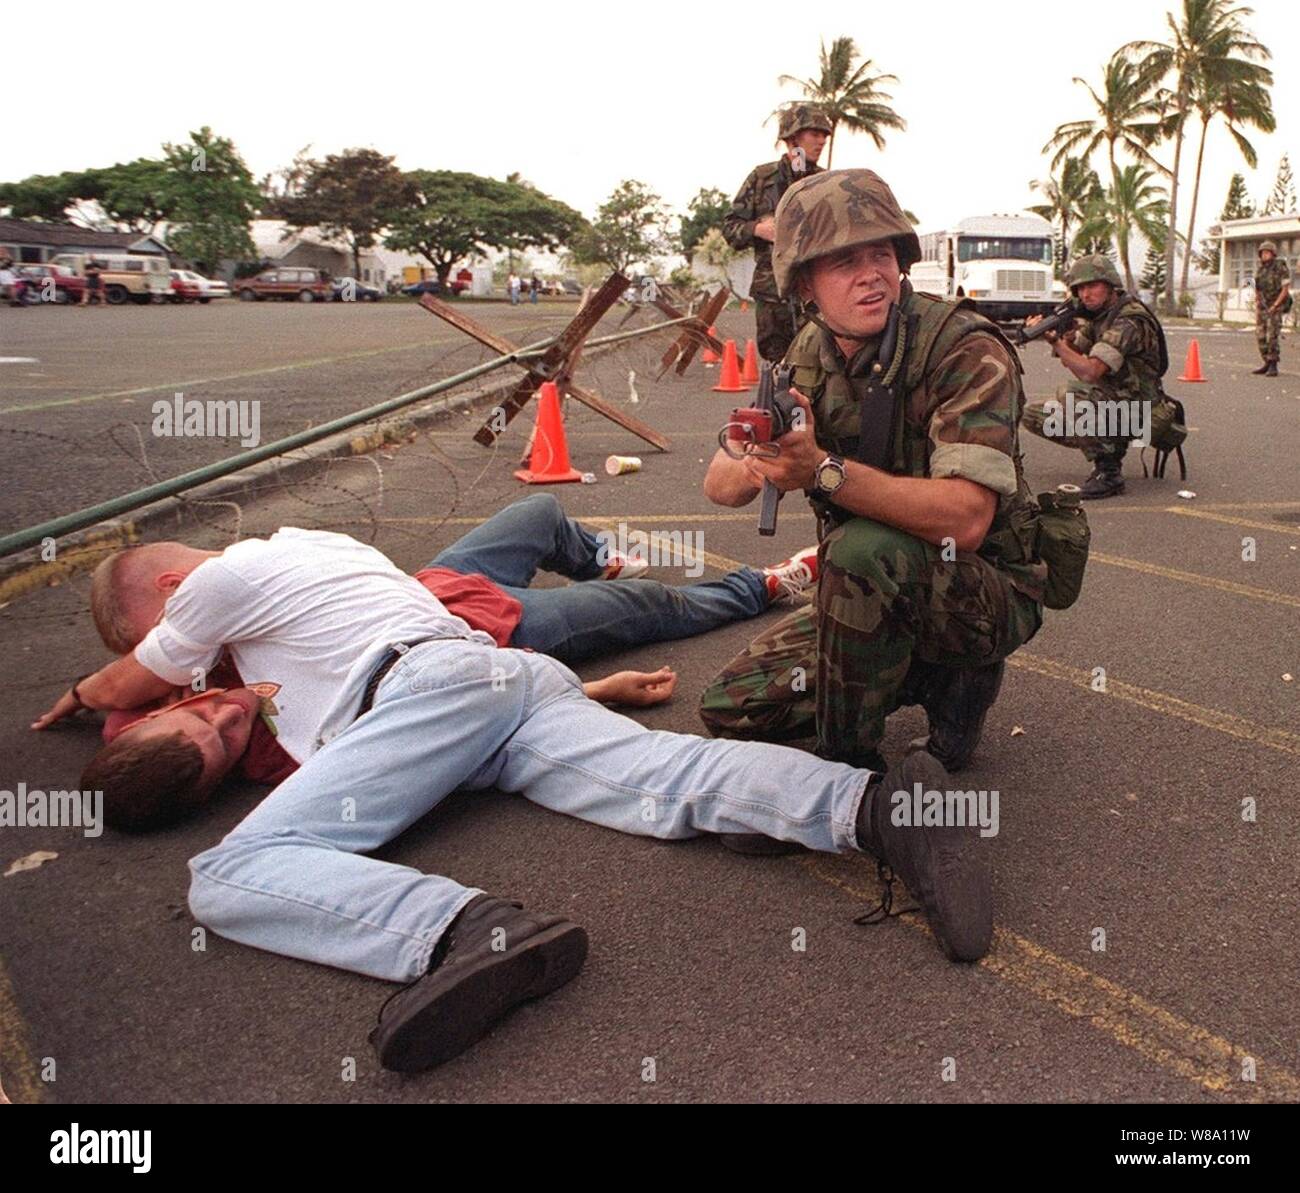 Navy Hospital Corpsman Eric Carver watches over two ТwoundedУ civilians seeking asylum in a fictitious American embassy while being fired upon during a simulated Noncombatant Evacuation Operation on June 11, 1996, at Kaneohe Bay Marine Corps Station, Hawaii, as part of exercise RIMPAC Ф96.  More than 44 ships, 200 aircraft and 30,000 soldiers, sailors, Marines, airmen and Coast Guardsmen are involved in the exercise.  The purpose of RIMPAC Ф96 is to improve coordination and interoperability of combined and joint forces in maritime tactical and theater operations.  Australia, Canada, Chile, Jap Stock Photo